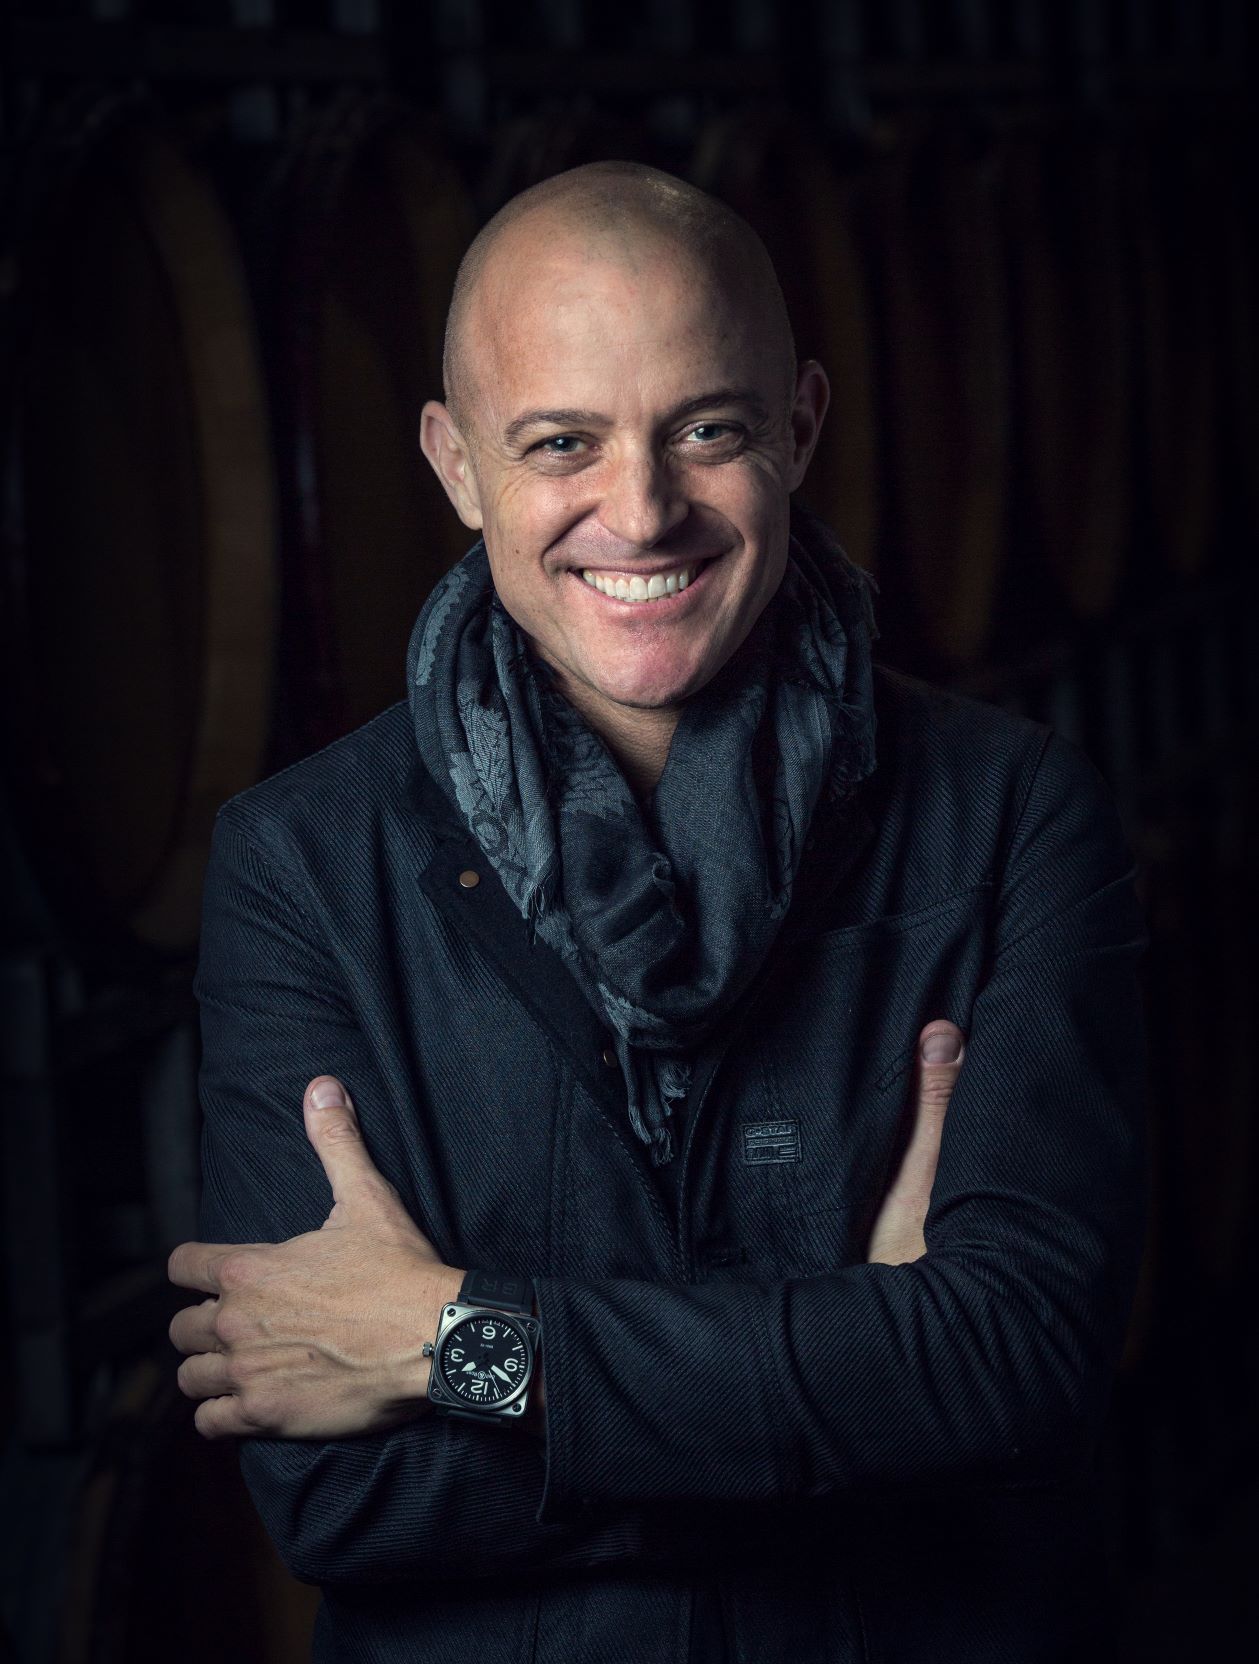 Greg Brewer, 2020 Winemaker of the Year by Wine Enthusiast, will be featured in the Jackson Family Wines tent and on the seminar stage of South Walton Beaches Wine & Food Festival, April 21-24, 2022.